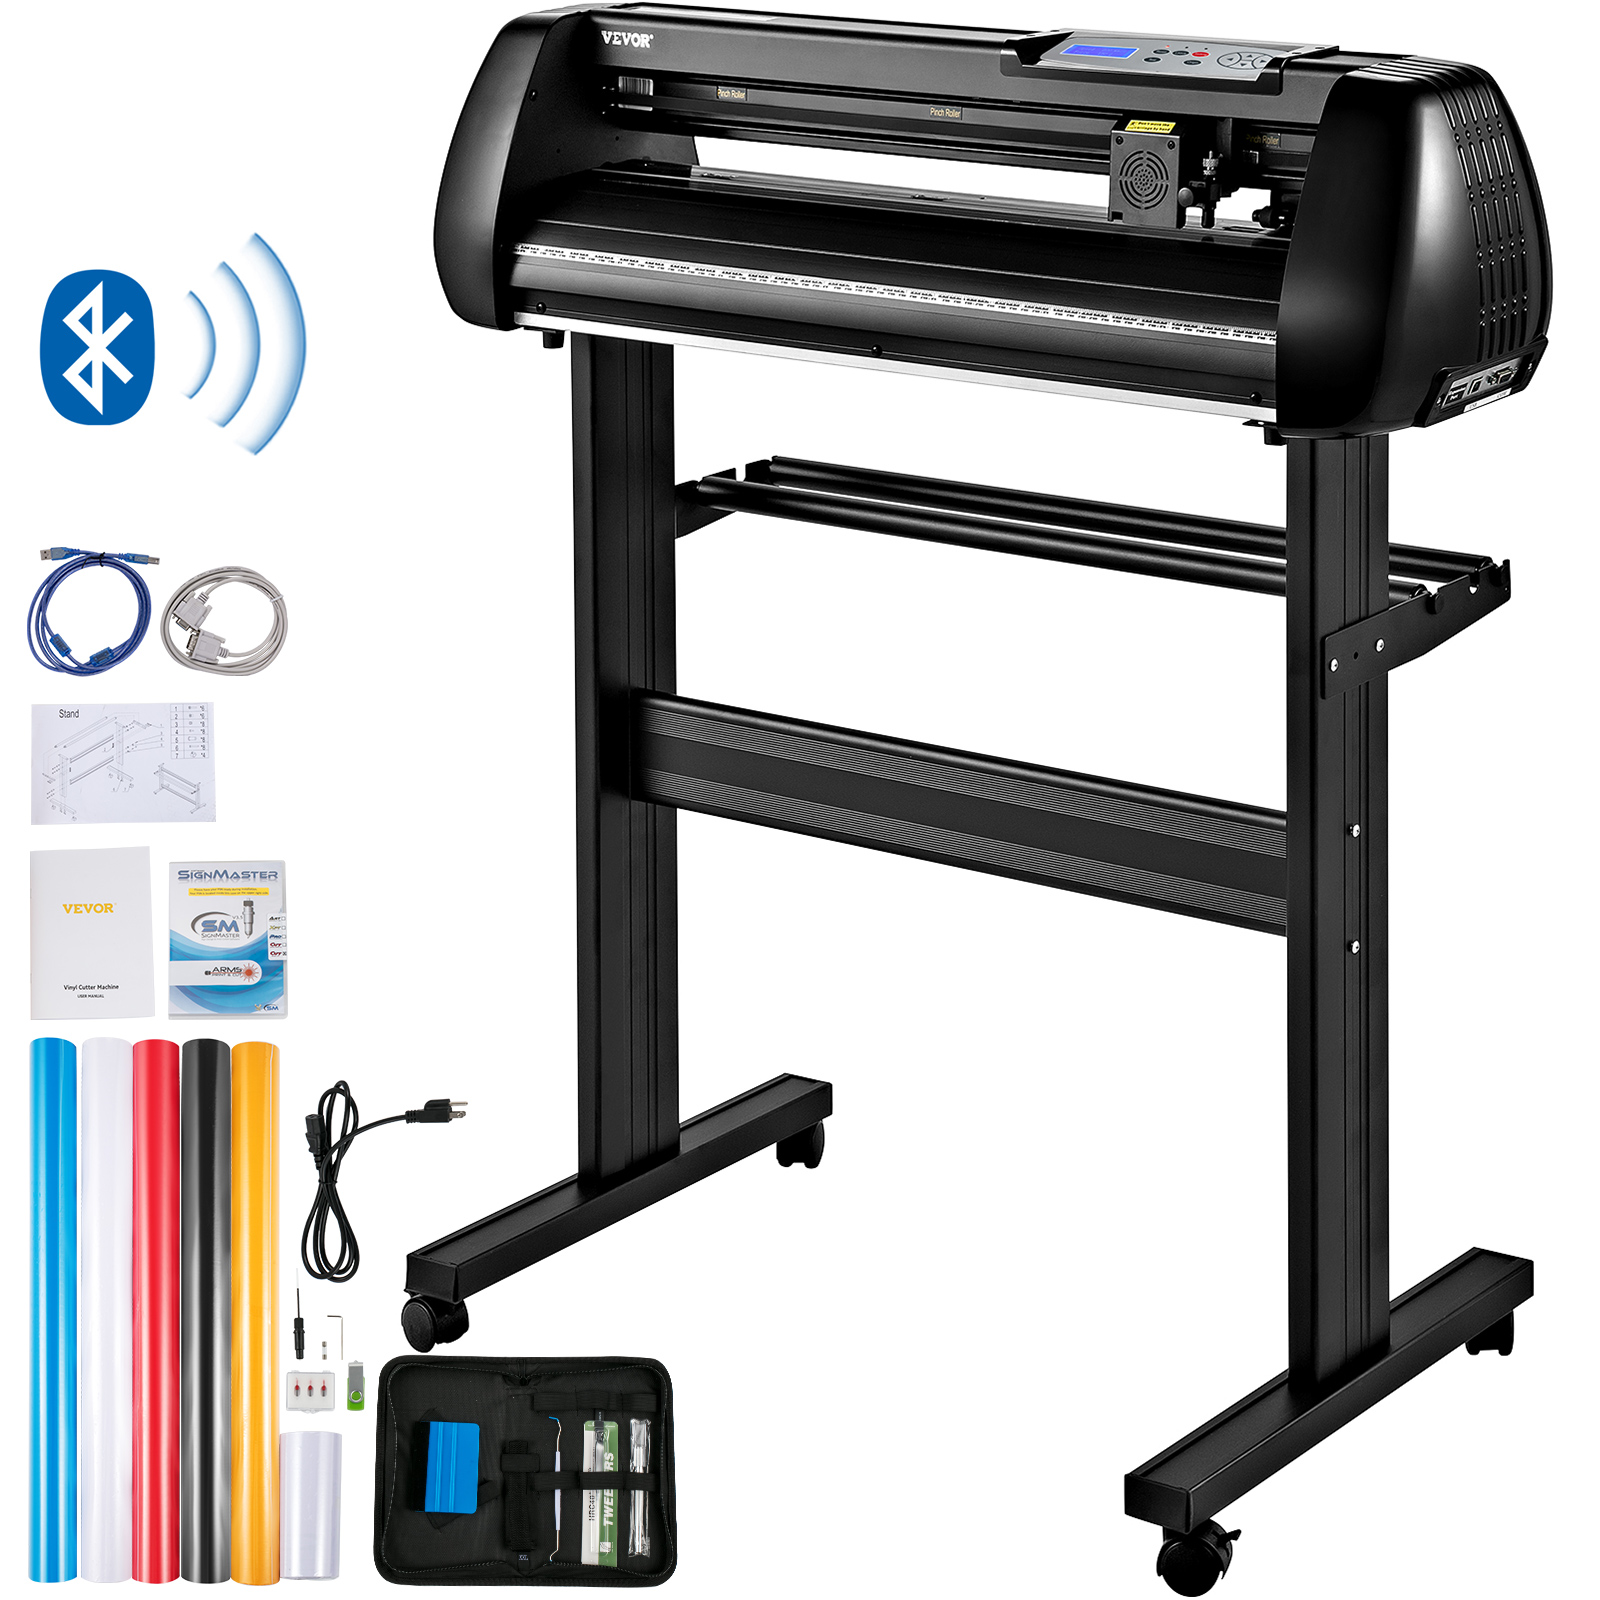 Vinyl Cutter Plotter,Manual Opeartion,Ample Accessories